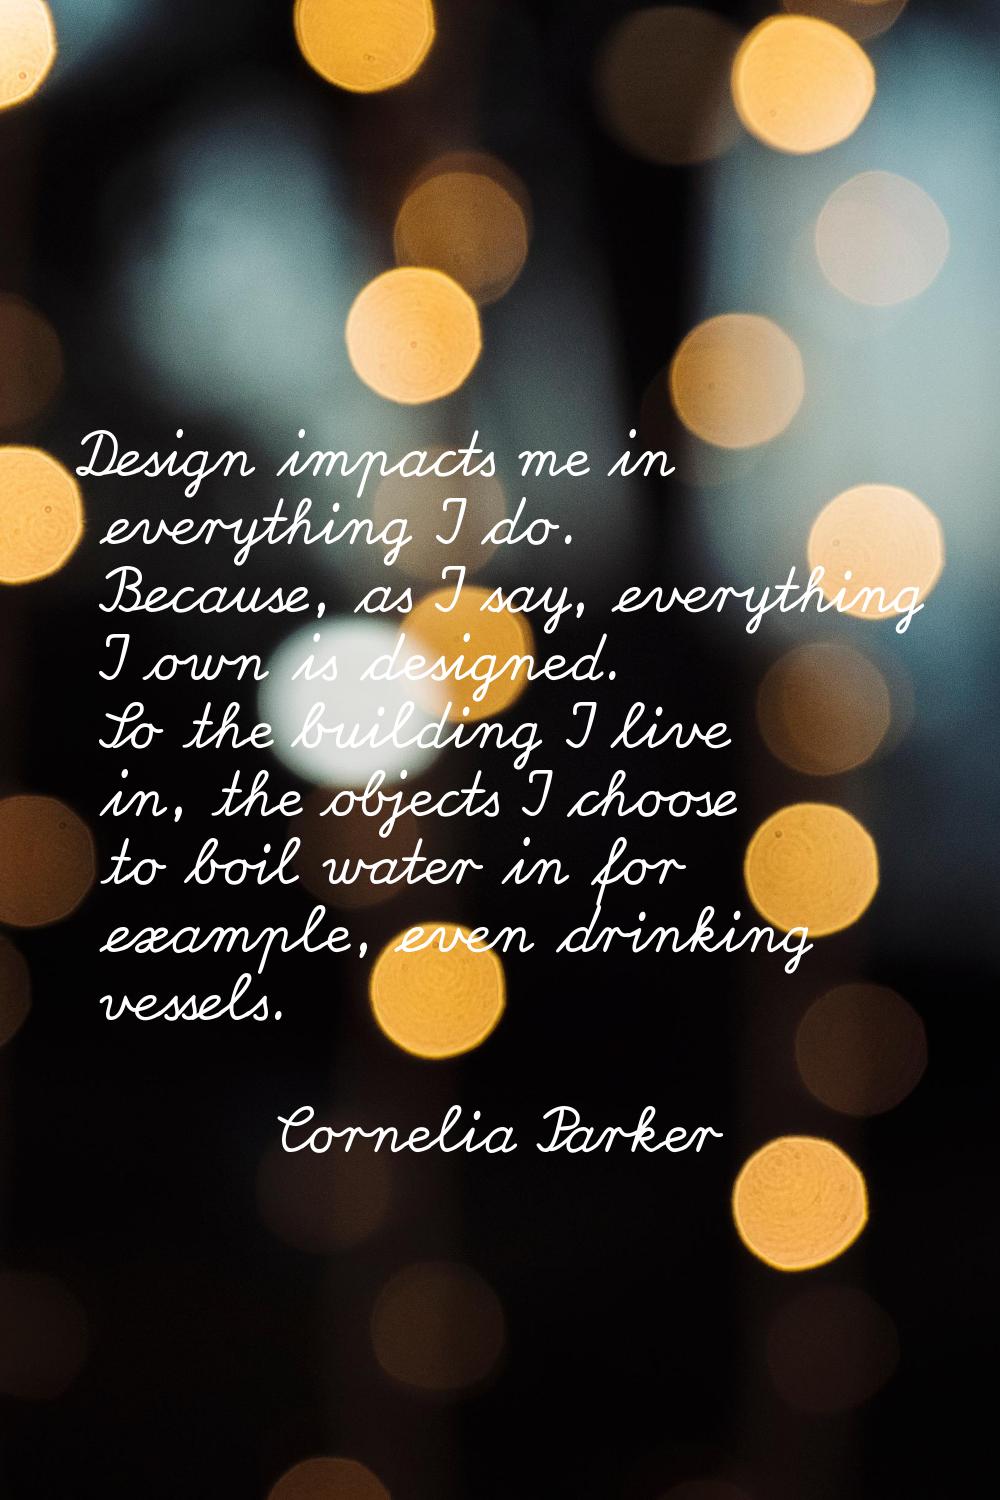 Design impacts me in everything I do. Because, as I say, everything I own is designed. So the build